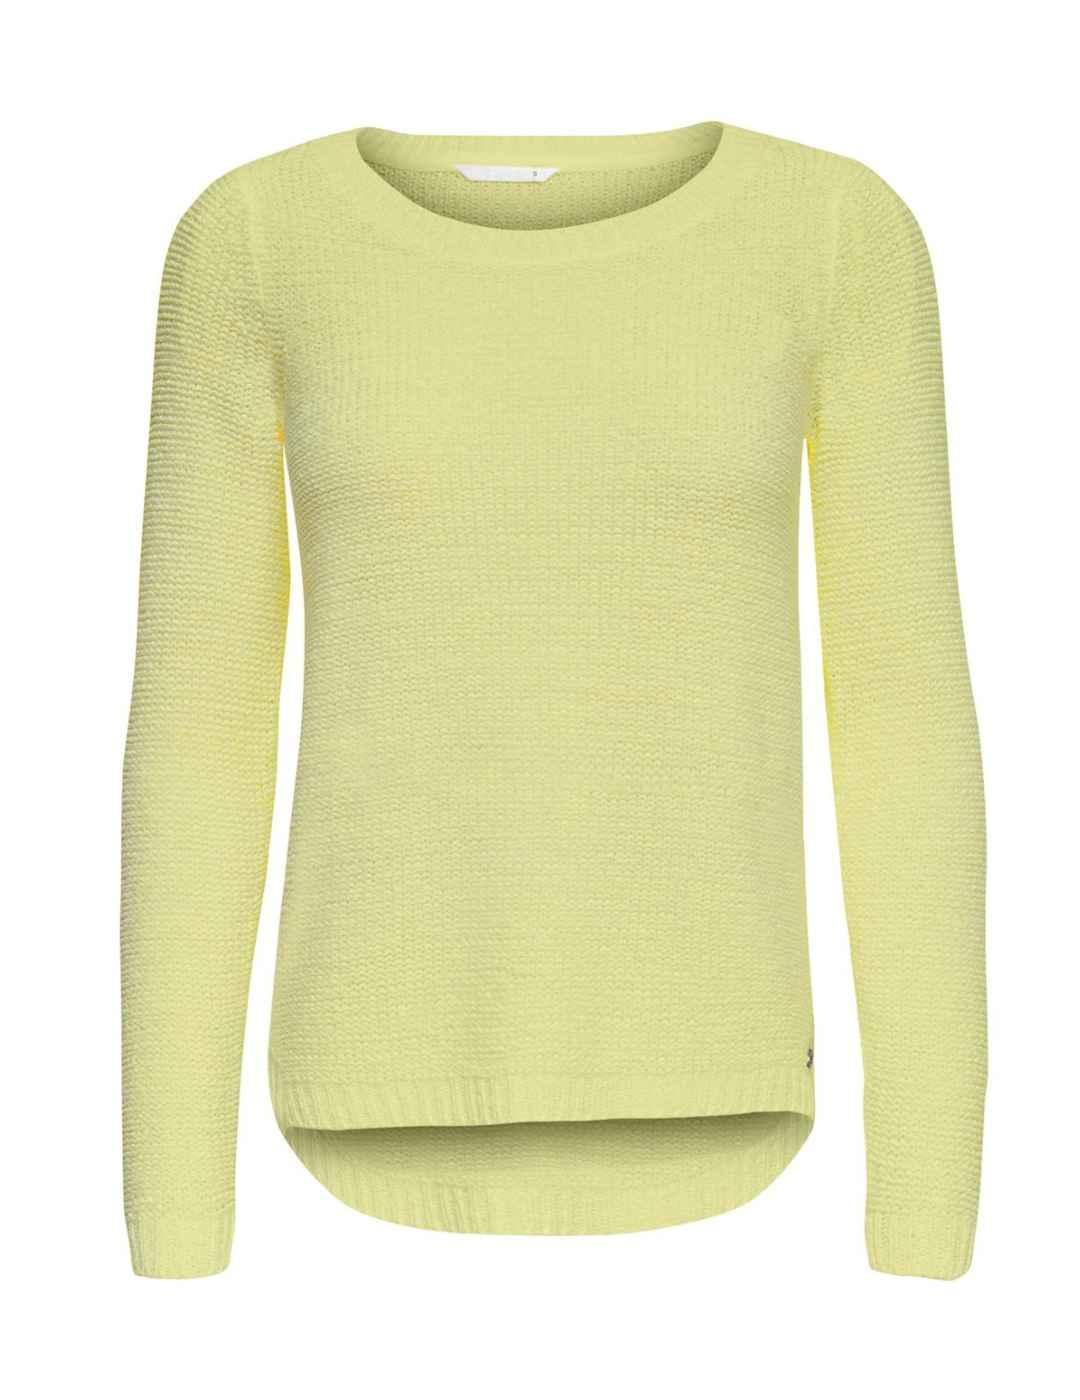 Only jersey de mujer Geena 15113356 amarillo claro yellow pear